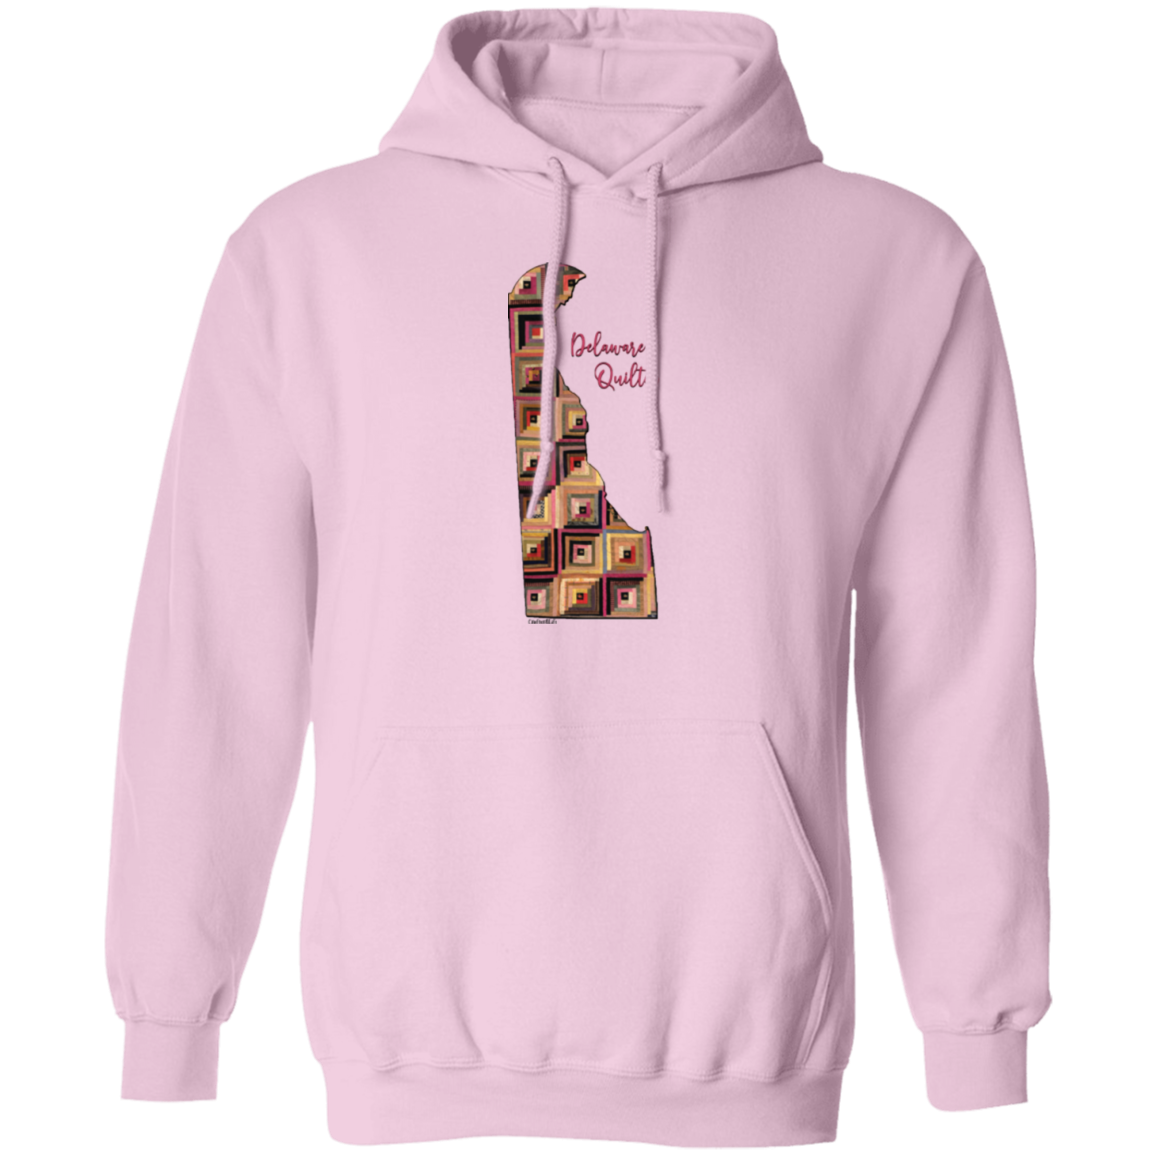 Delaware Quilter Pullover Hoodie, Gift for Quilting Friends and Family